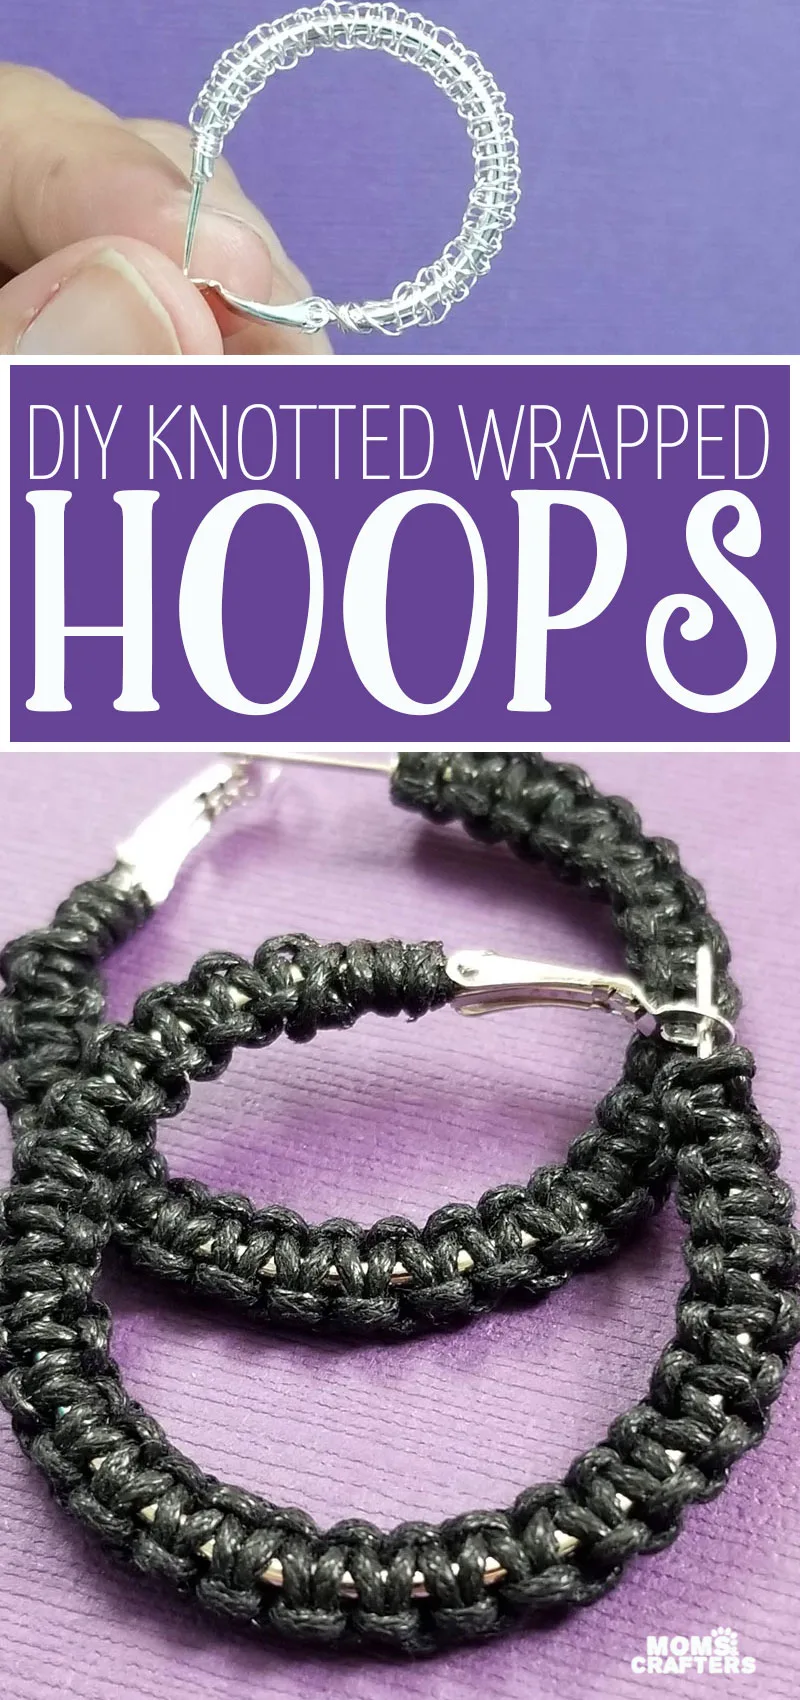 Click to learn how to make wrapped hoop earrings - using a cobra stitch! You can make these with string or cord, or even with wire, for a cool crochet earring look!